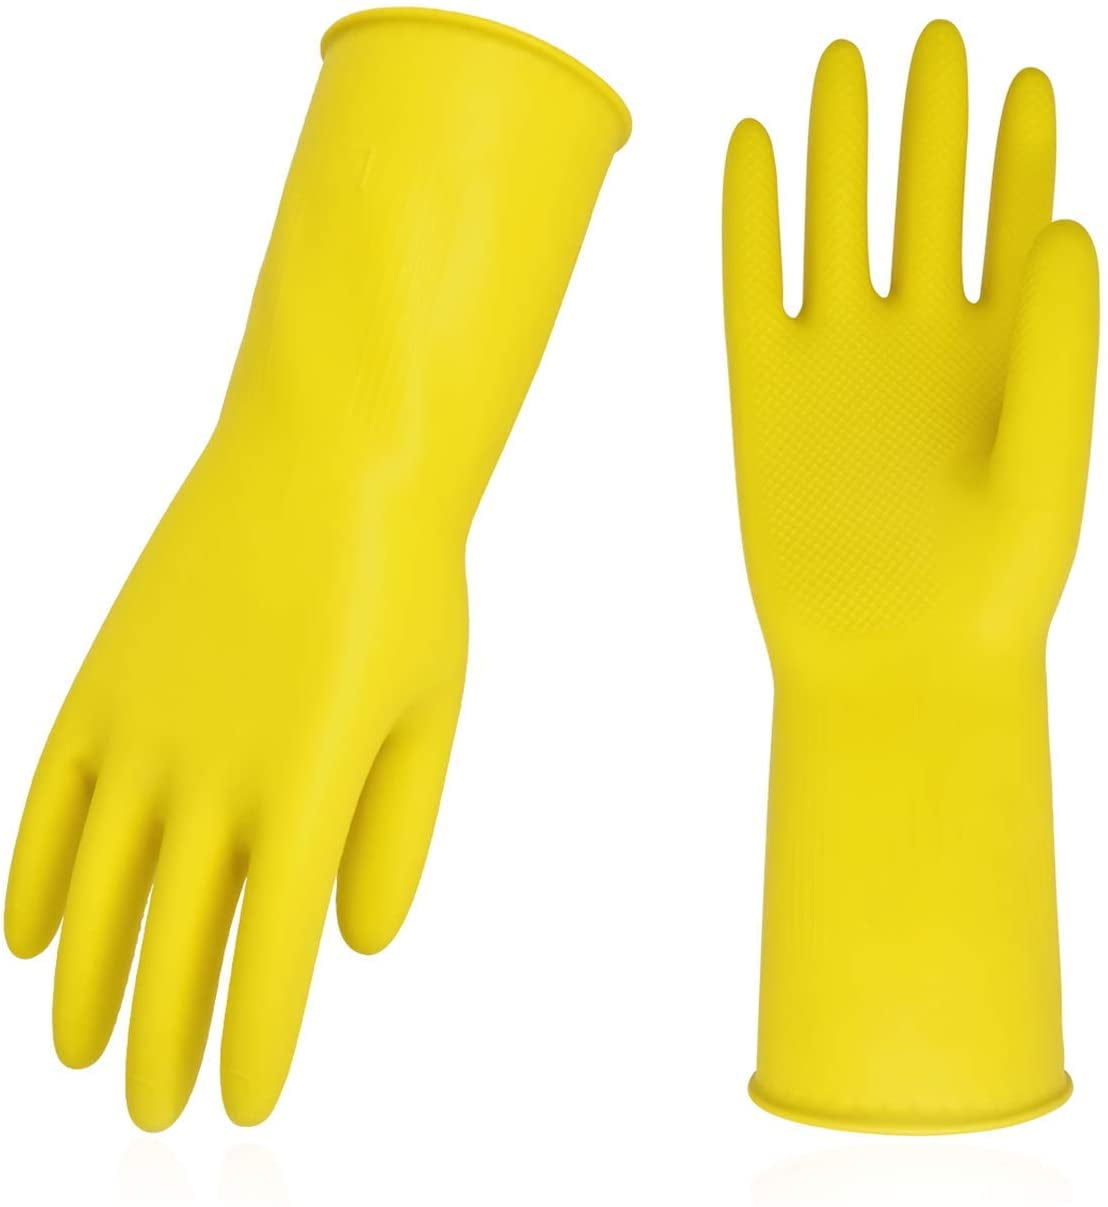 Kitchen Wash Dish Cleaning Waterproof Long Gloves Cold-Proof Thicken Rubber 